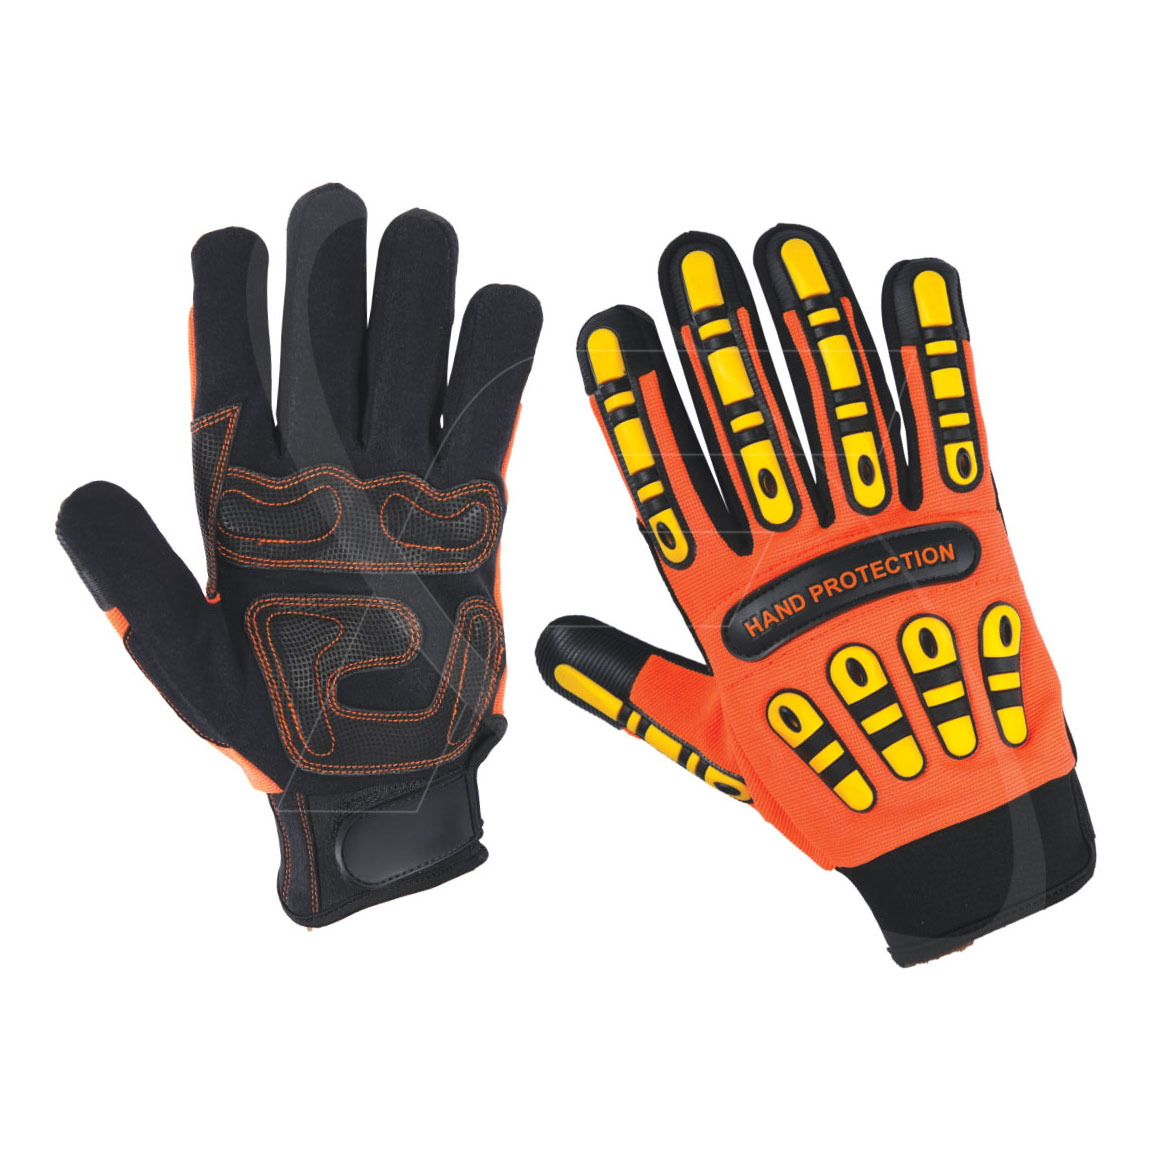 Best Impact Protective Mechanic Gloves for Oil and Gas Industries Safety Work Gloves for Oil Field Impact Protective Work Gloves